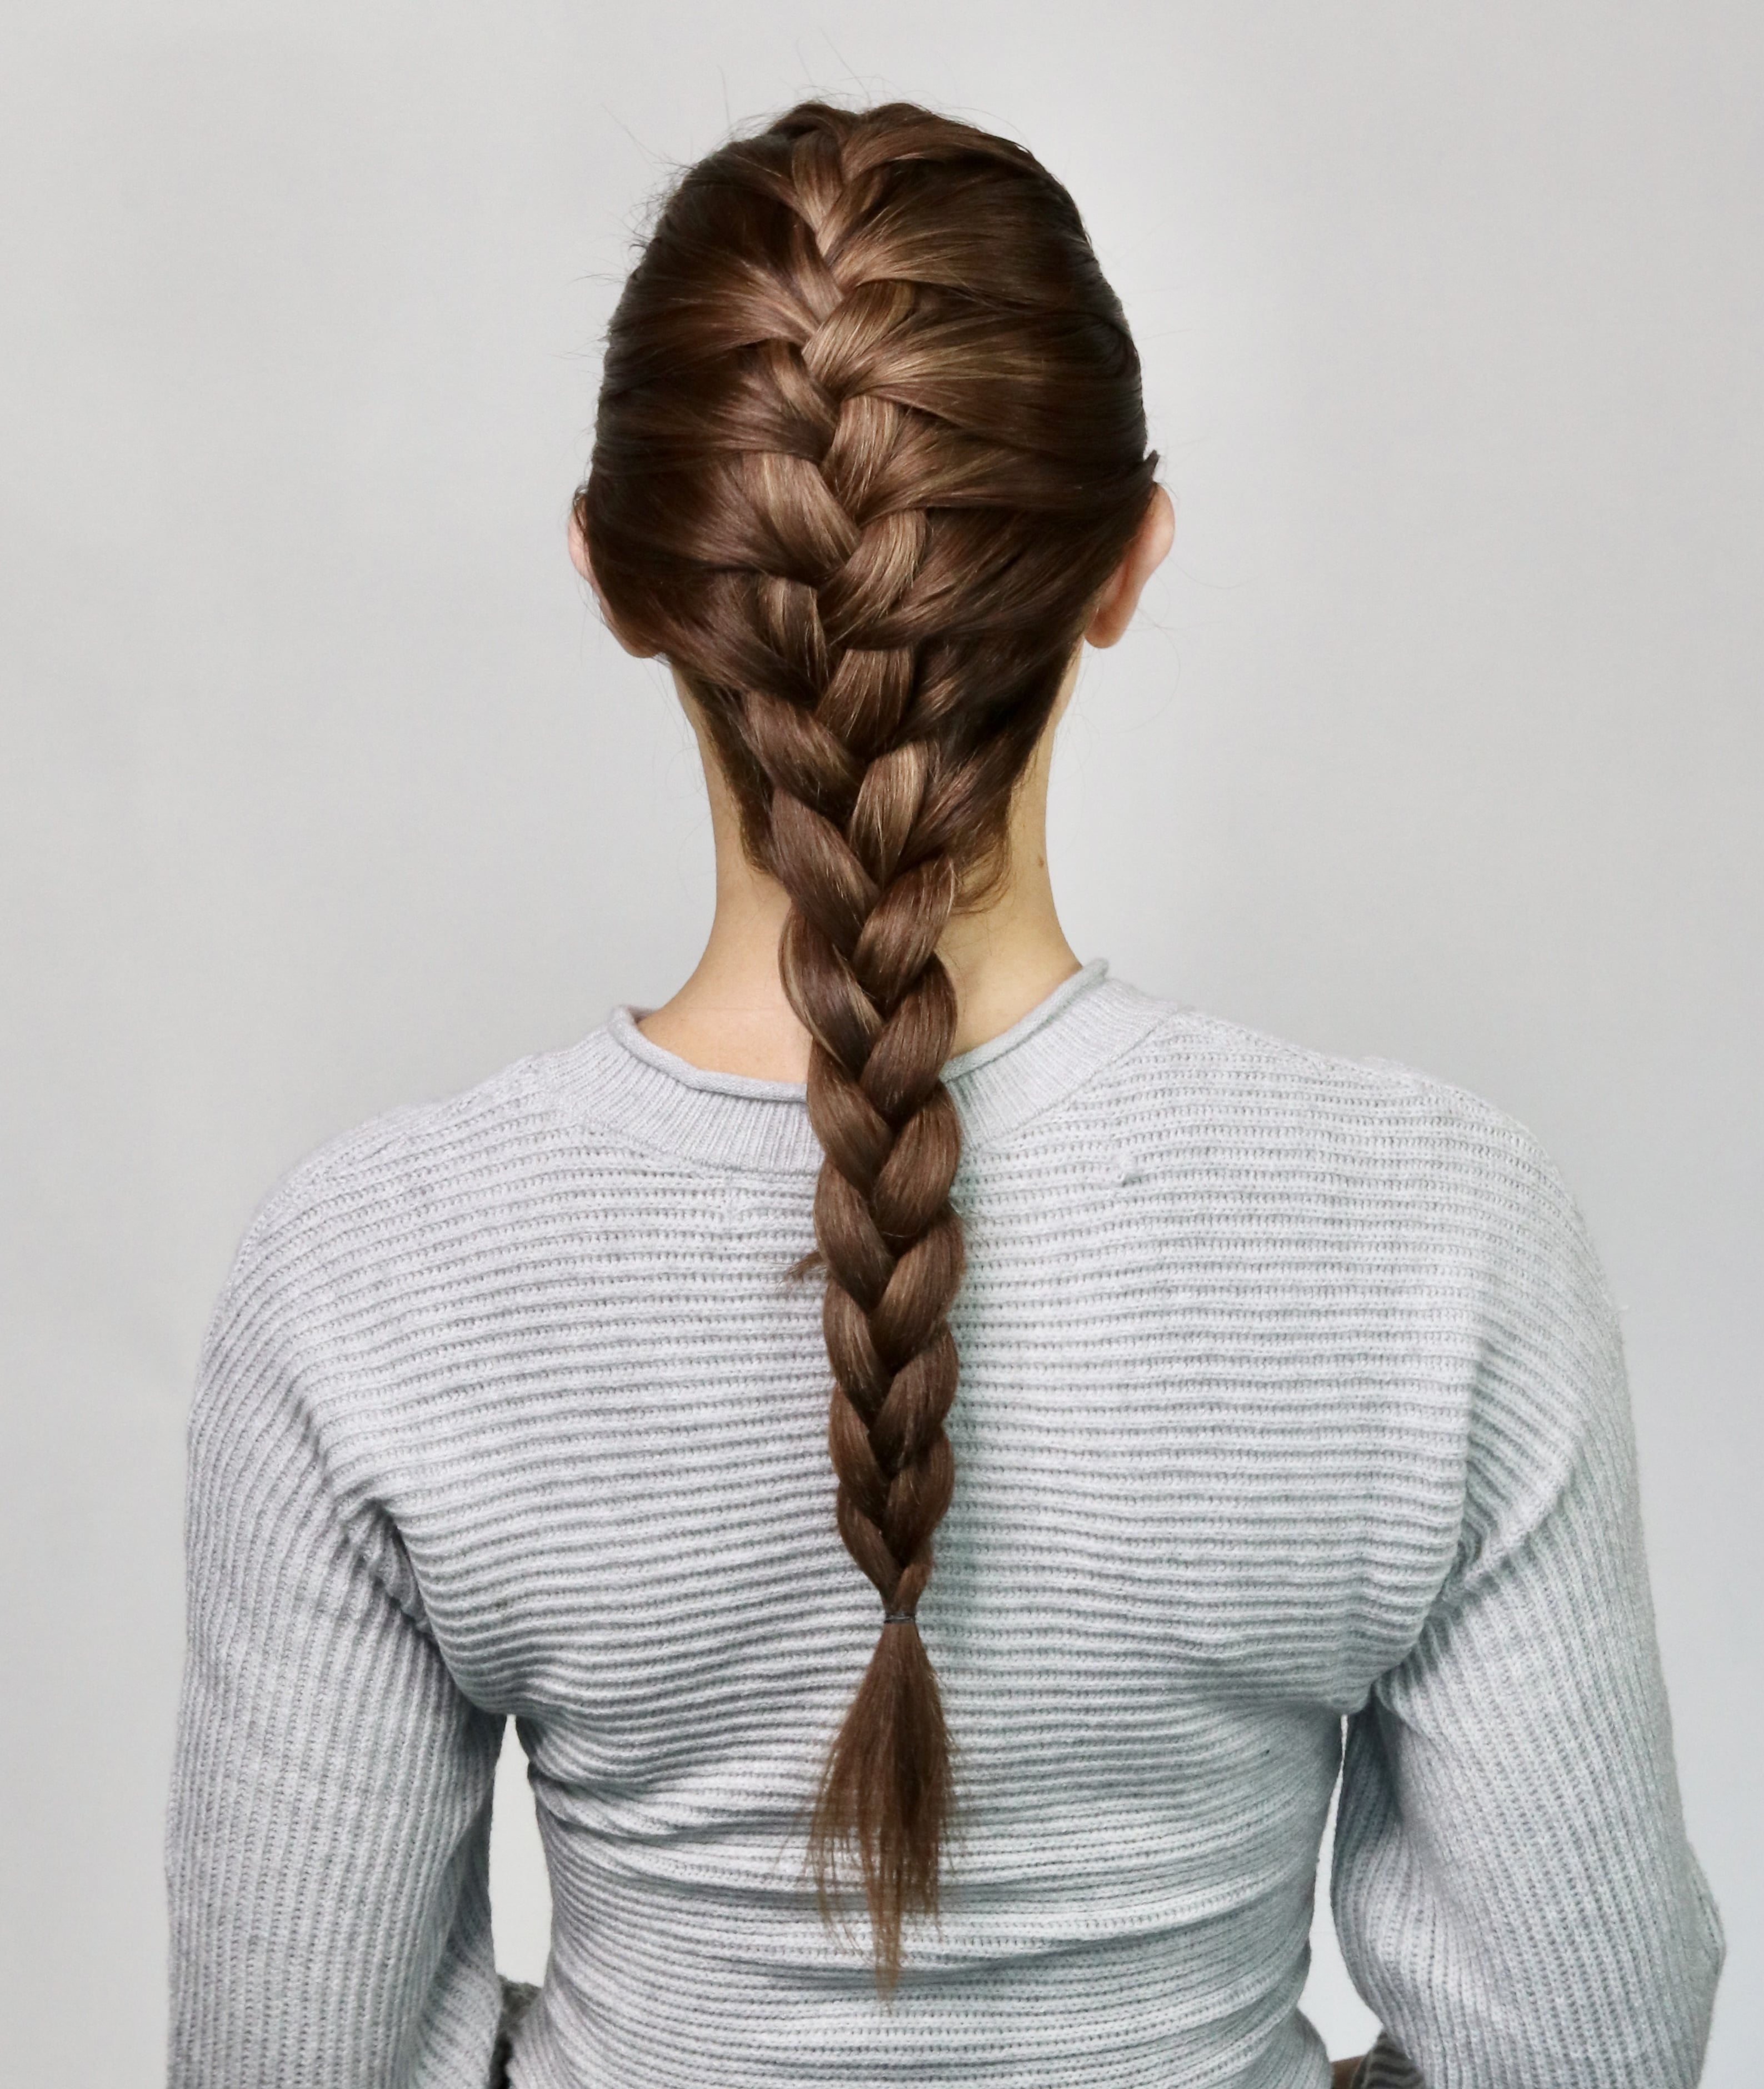 Here is our hair tutorial on french braid pigtails!!